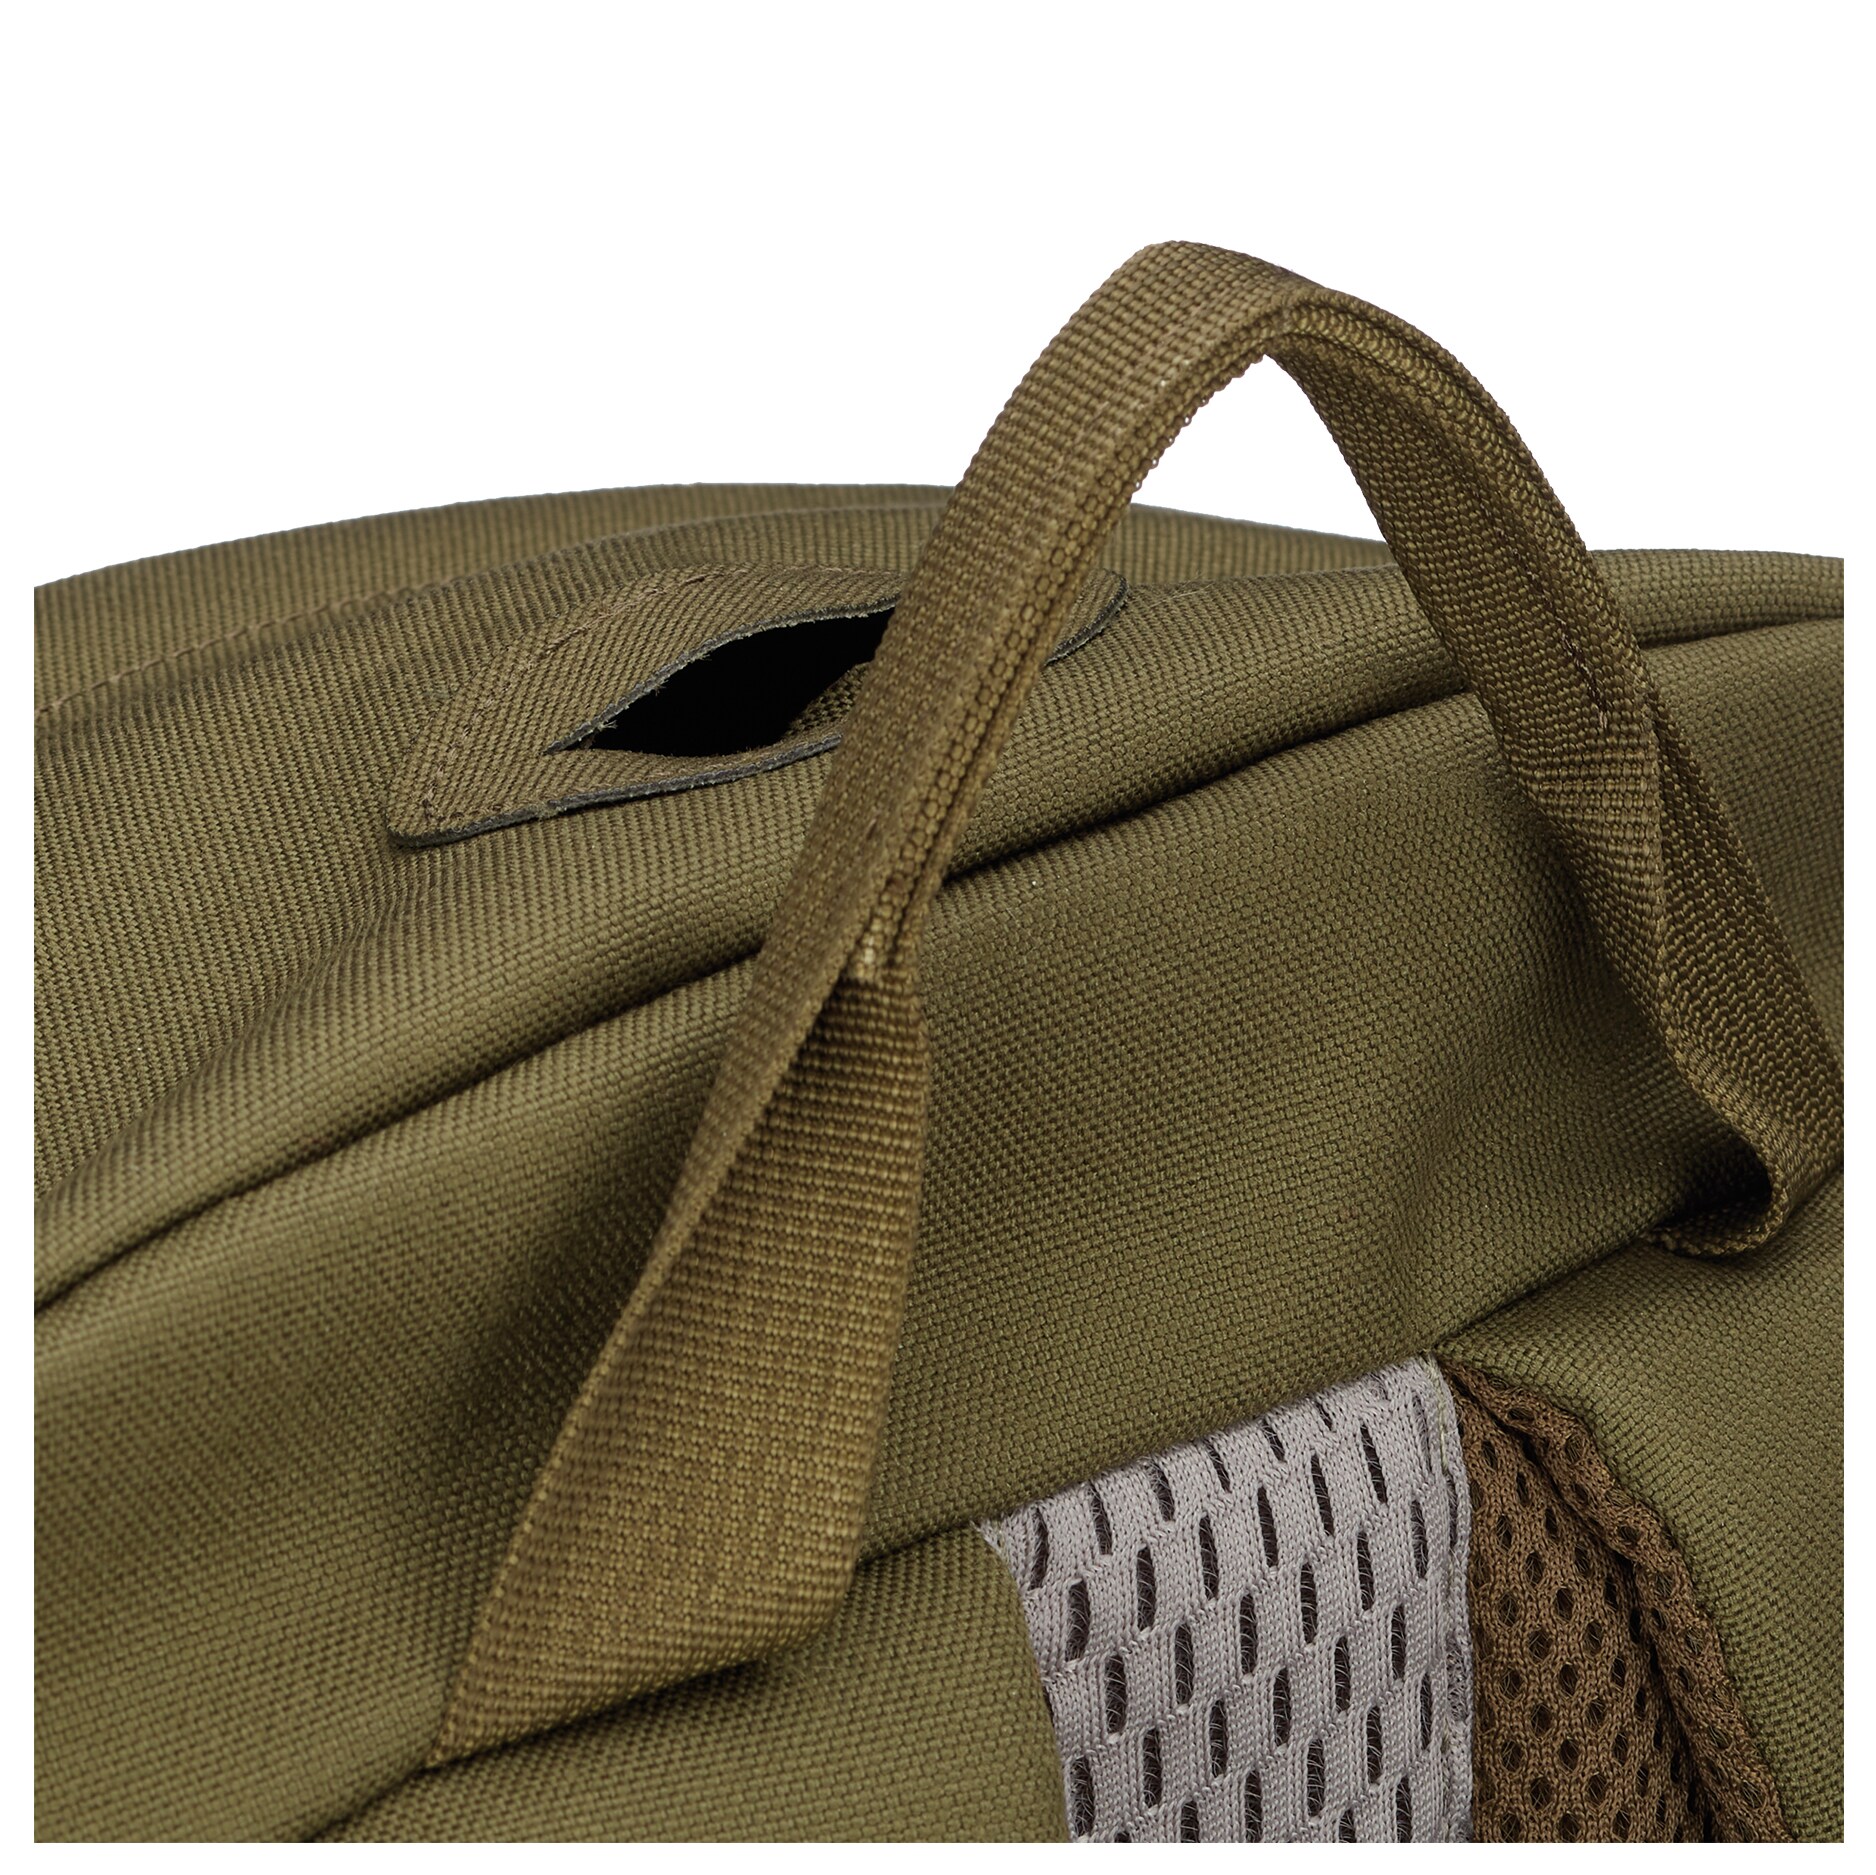 Purchase the TT Backpack Urban Tac Pack 22 olive by ASMC